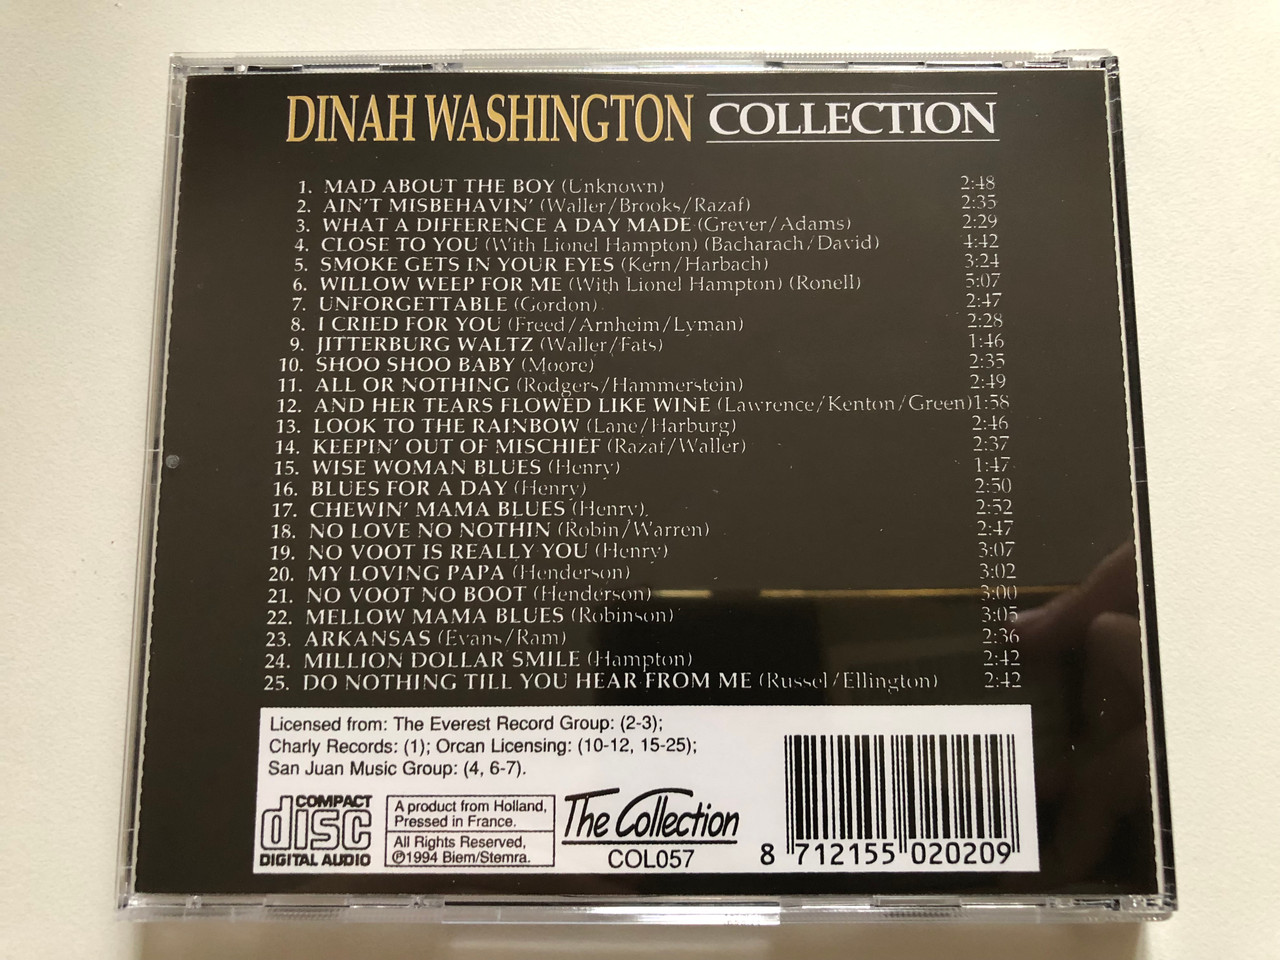 https://cdn10.bigcommerce.com/s-62bdpkt7pb/products/0/images/310588/Dinah_Washington_Collection_25_Songs_The_Collection_Audio_CD_1994_COL057_2__44016.1699391940.1280.1280.JPG?c=2